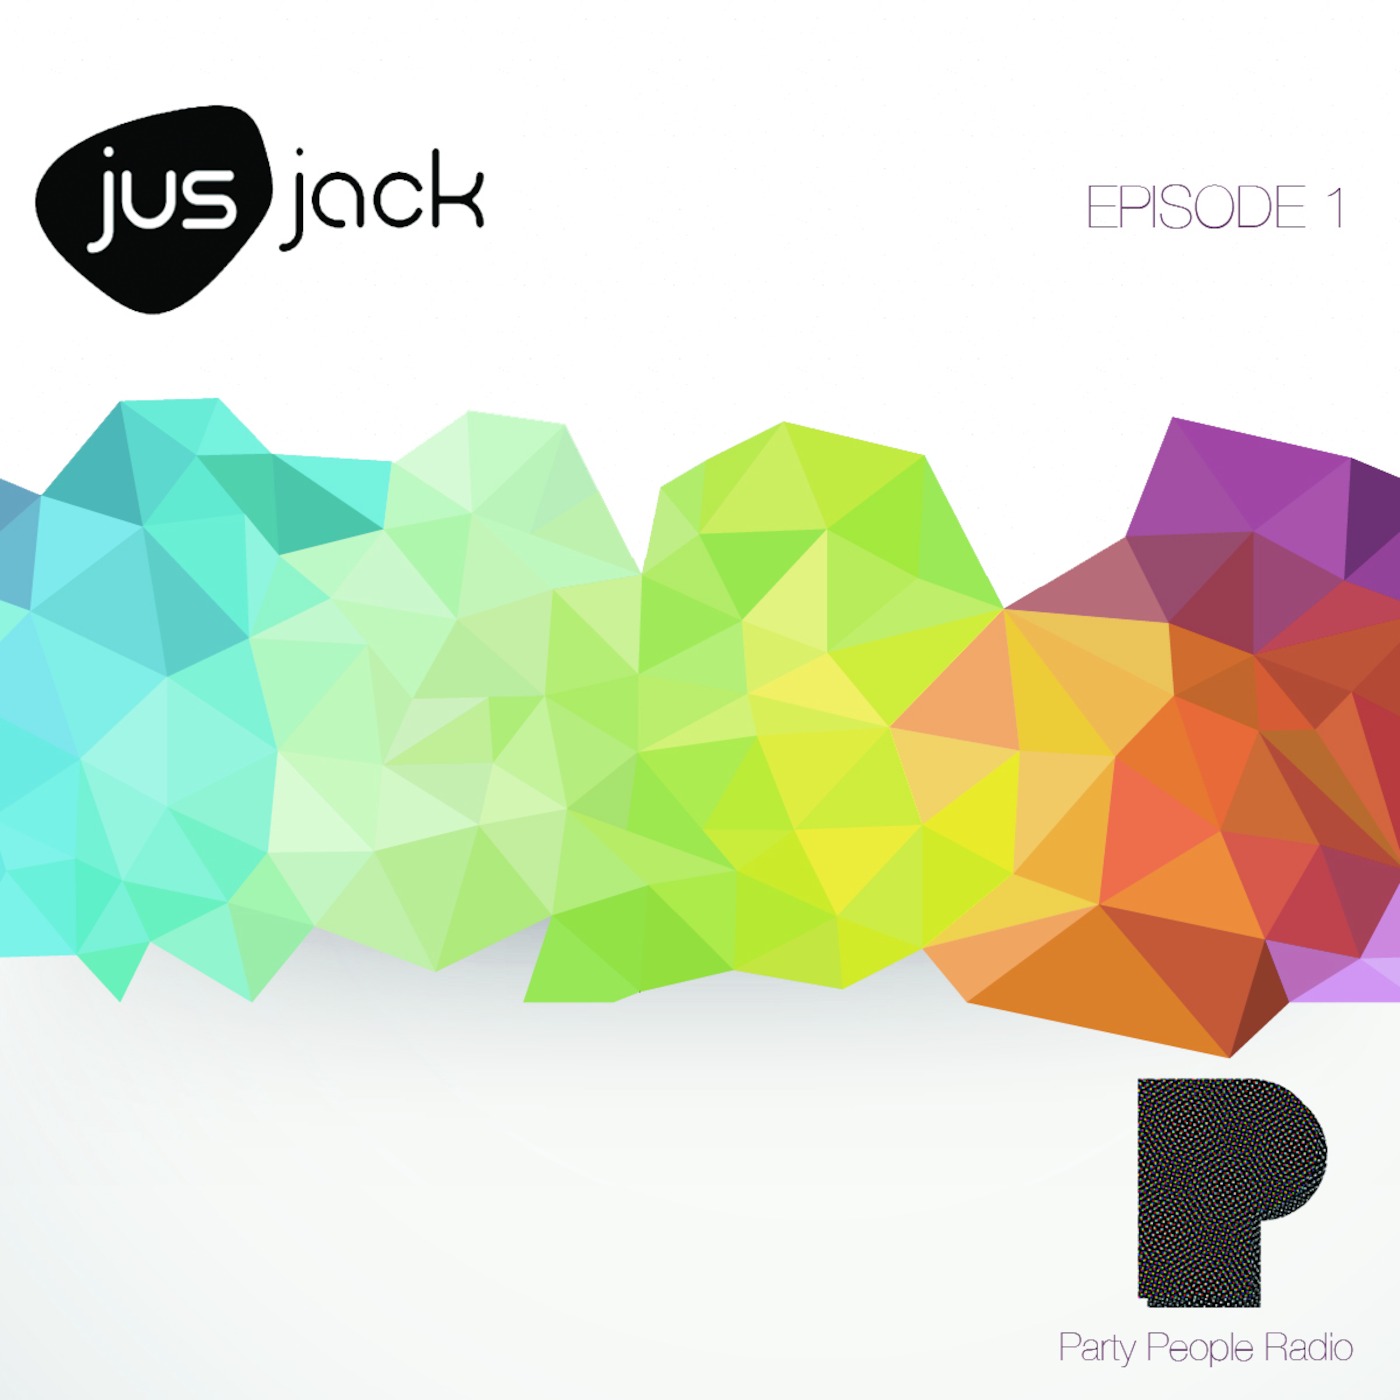 Party People Radio by Jus Jack